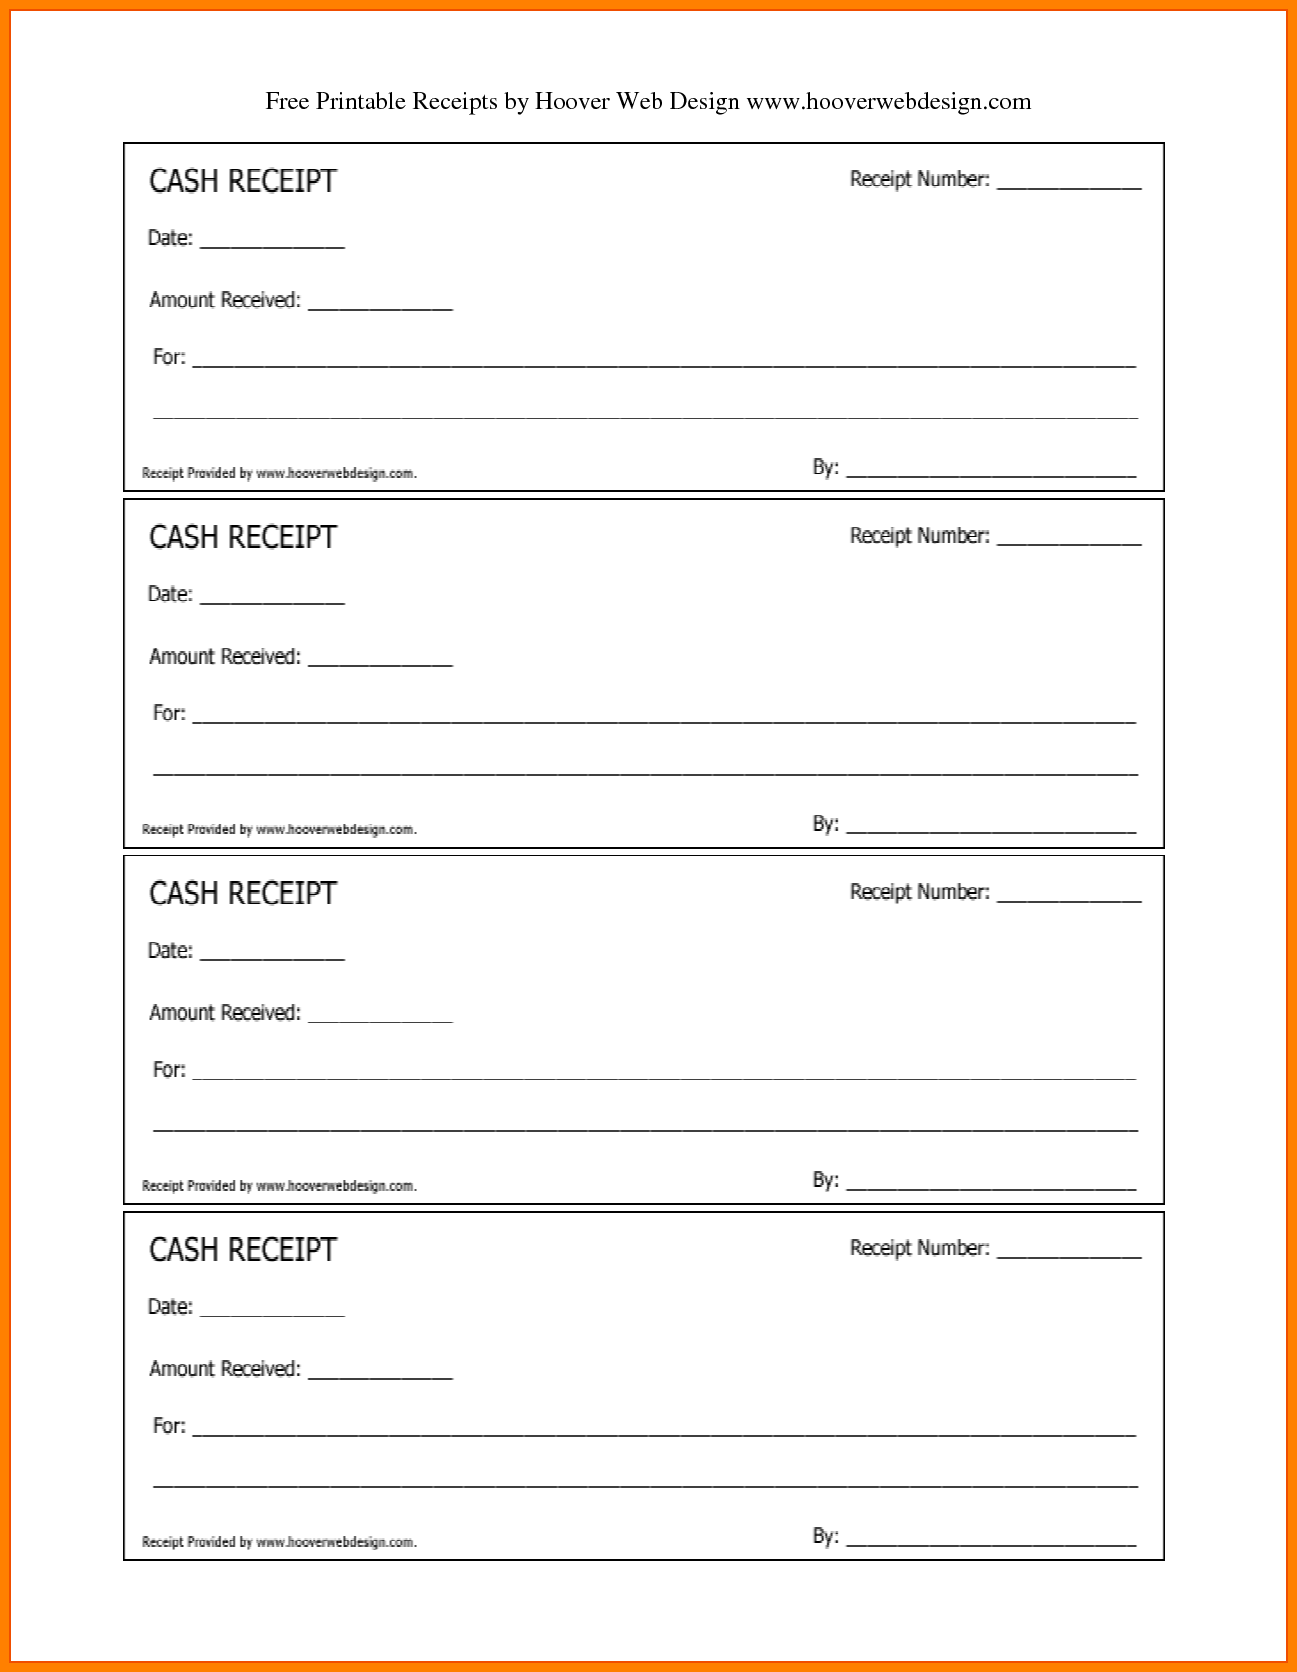 Free Printable Payment Information Forms Printable Forms Free Online